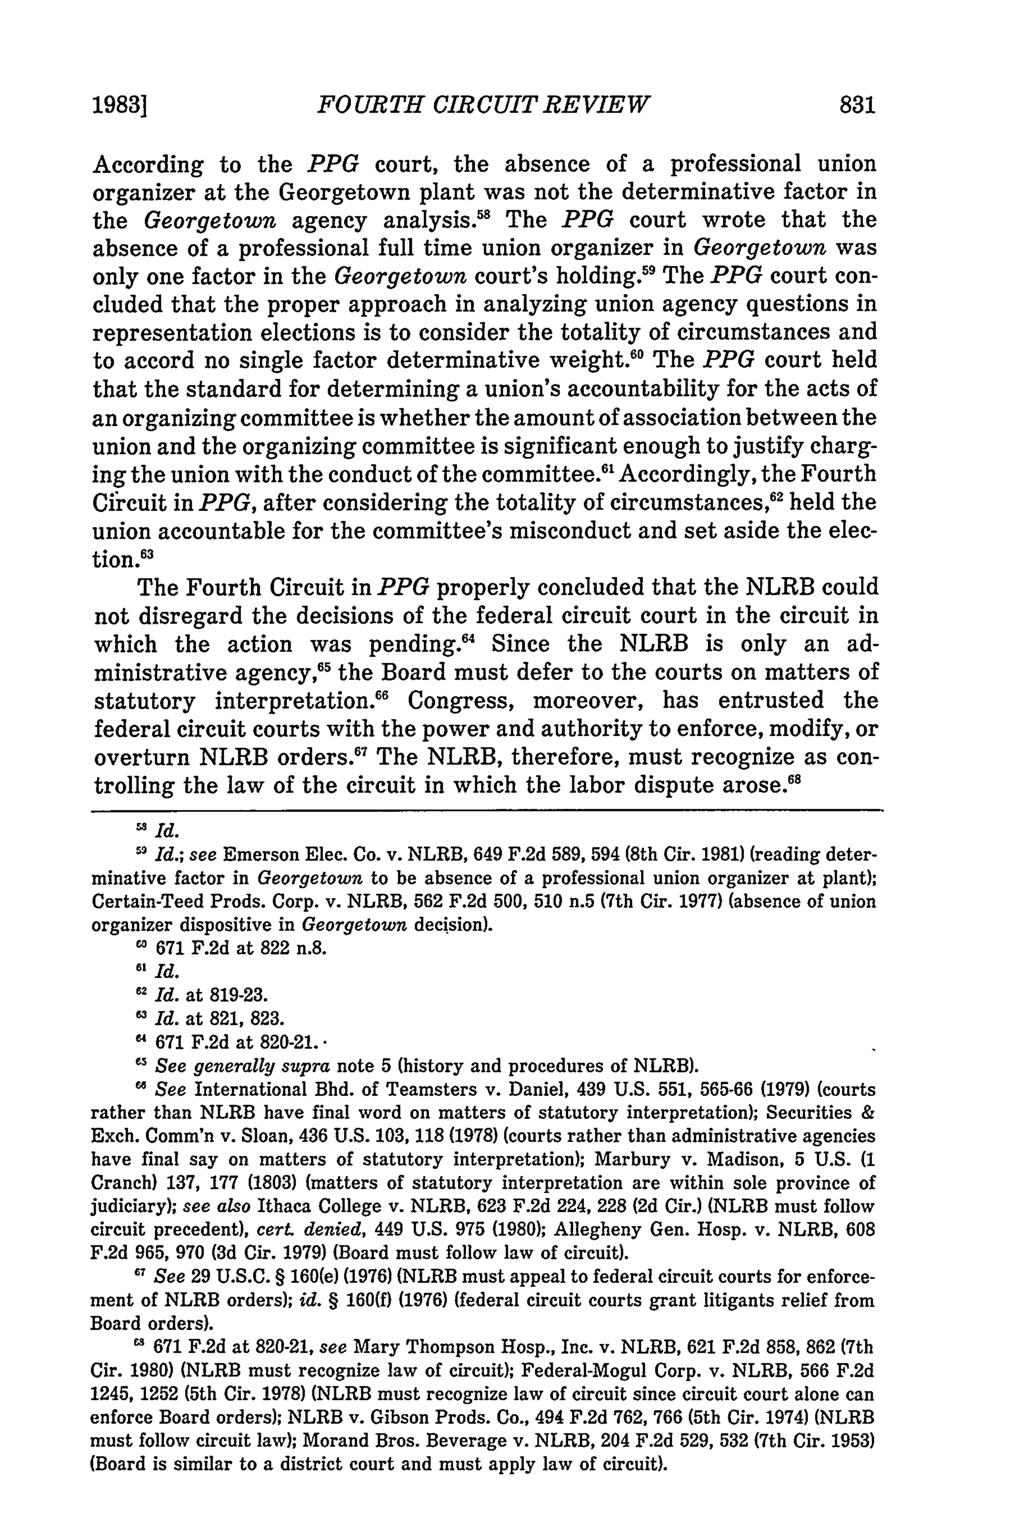 1983] FOURTH CIRCUIT RE VIE W According to the PPG court, the absence of a professional union organizer at the Georgetown plant was not the determinative factor in the Georgetown agency analysis.